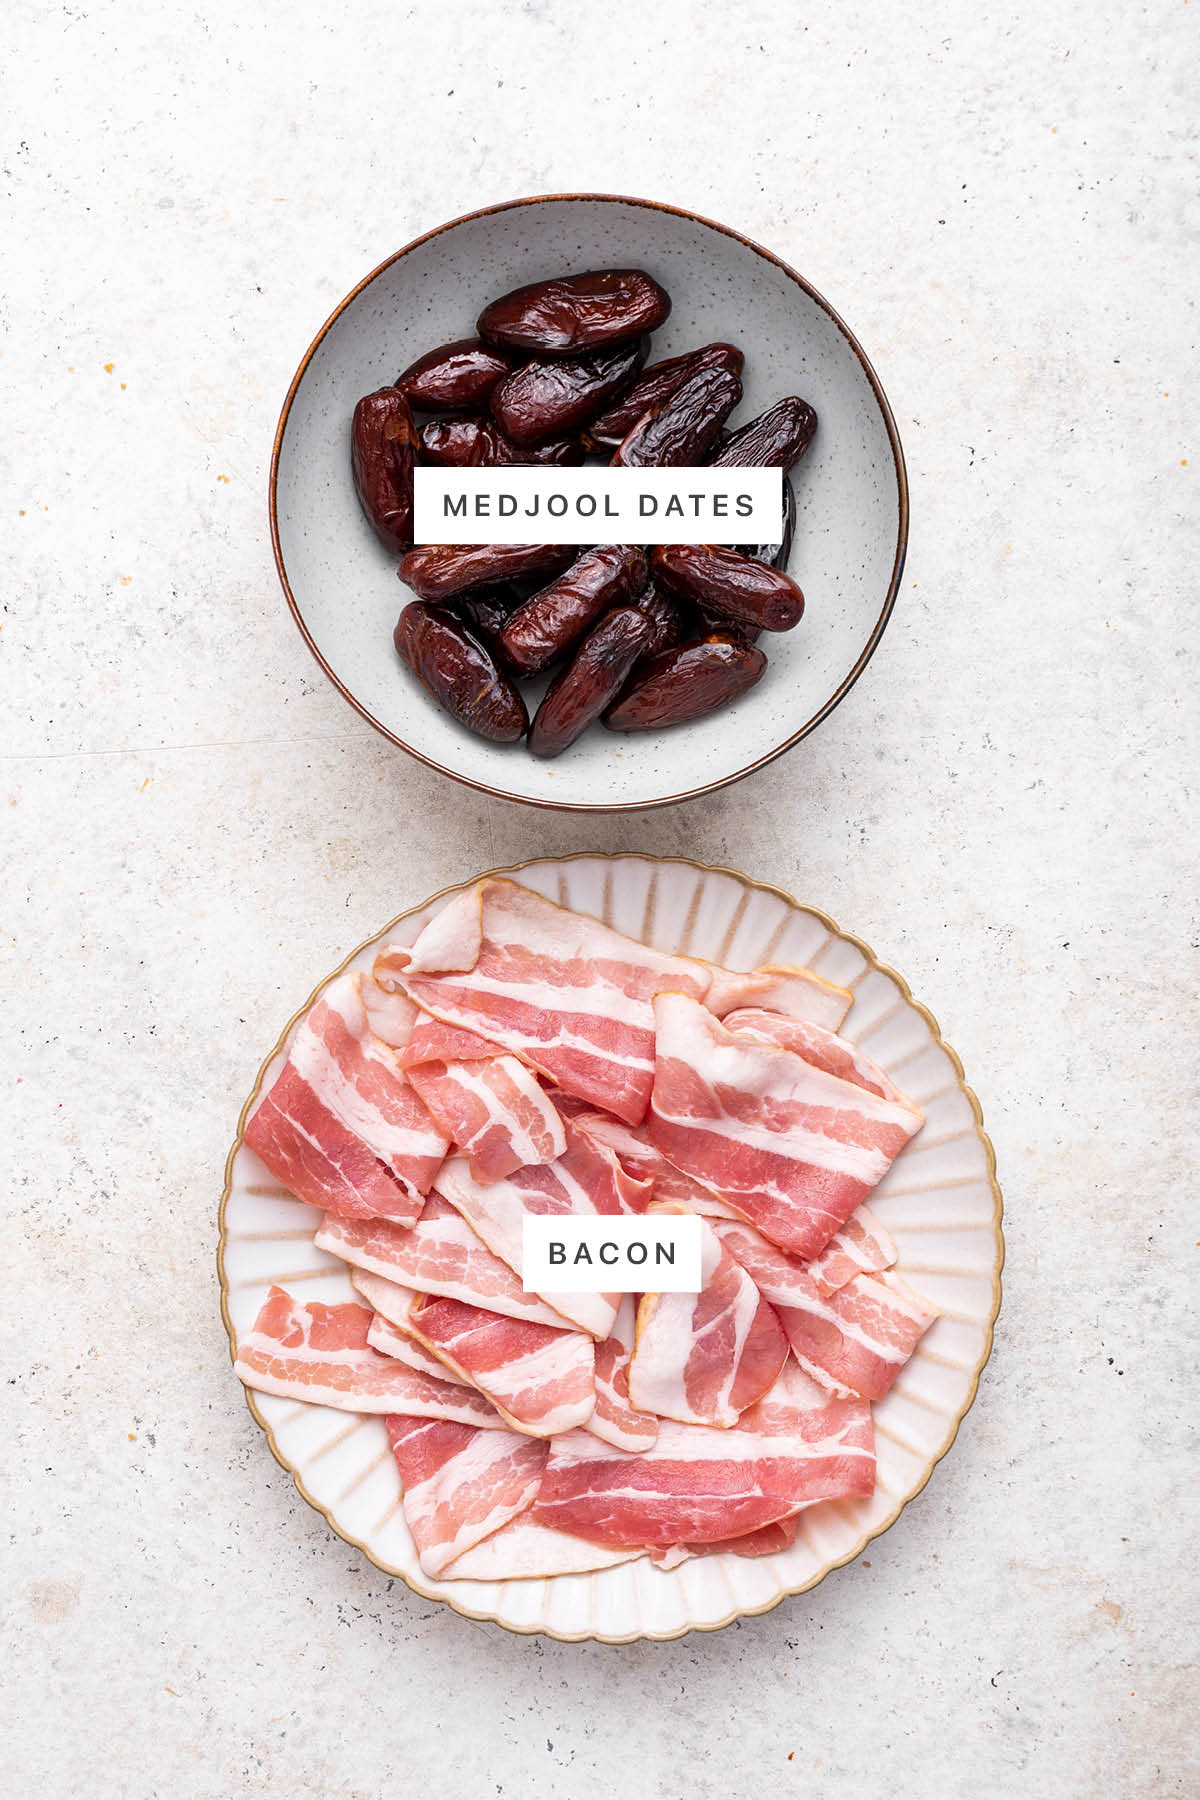 Ingredients measured out to make Bacon Wrapped Dates: medjool dates and bacon.